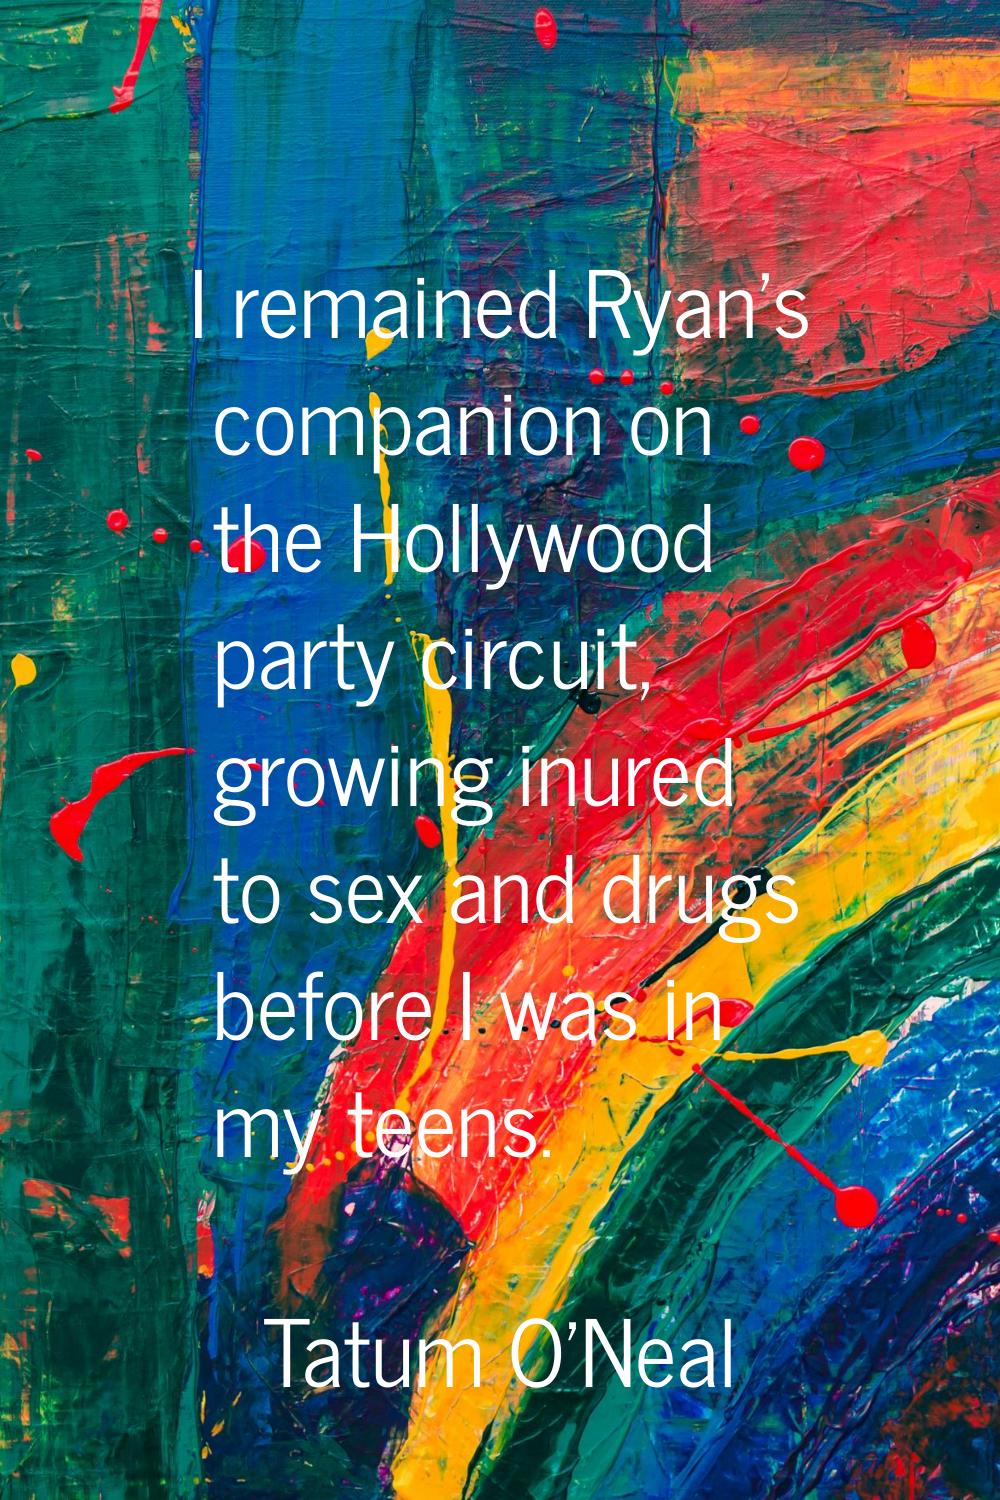 I remained Ryan's companion on the Hollywood party circuit, growing inured to sex and drugs before 